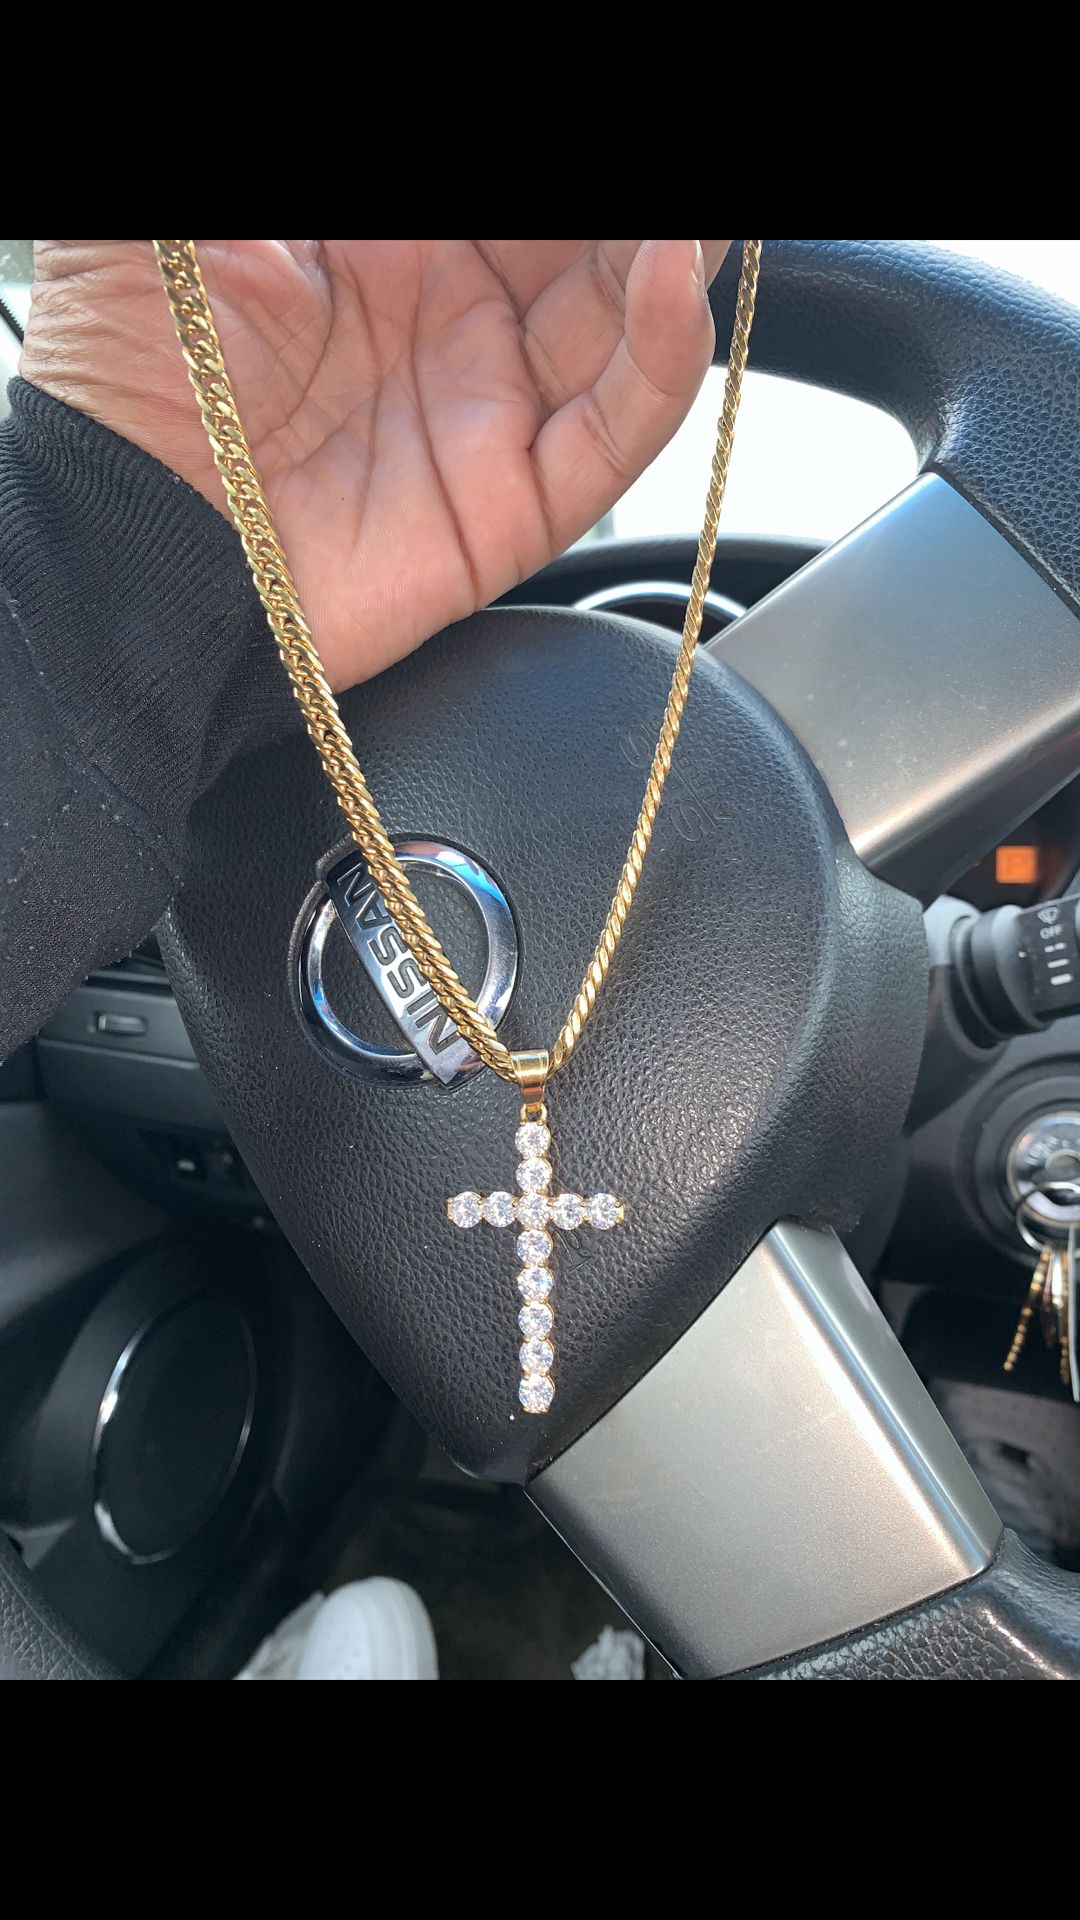 Gold chain with pendant